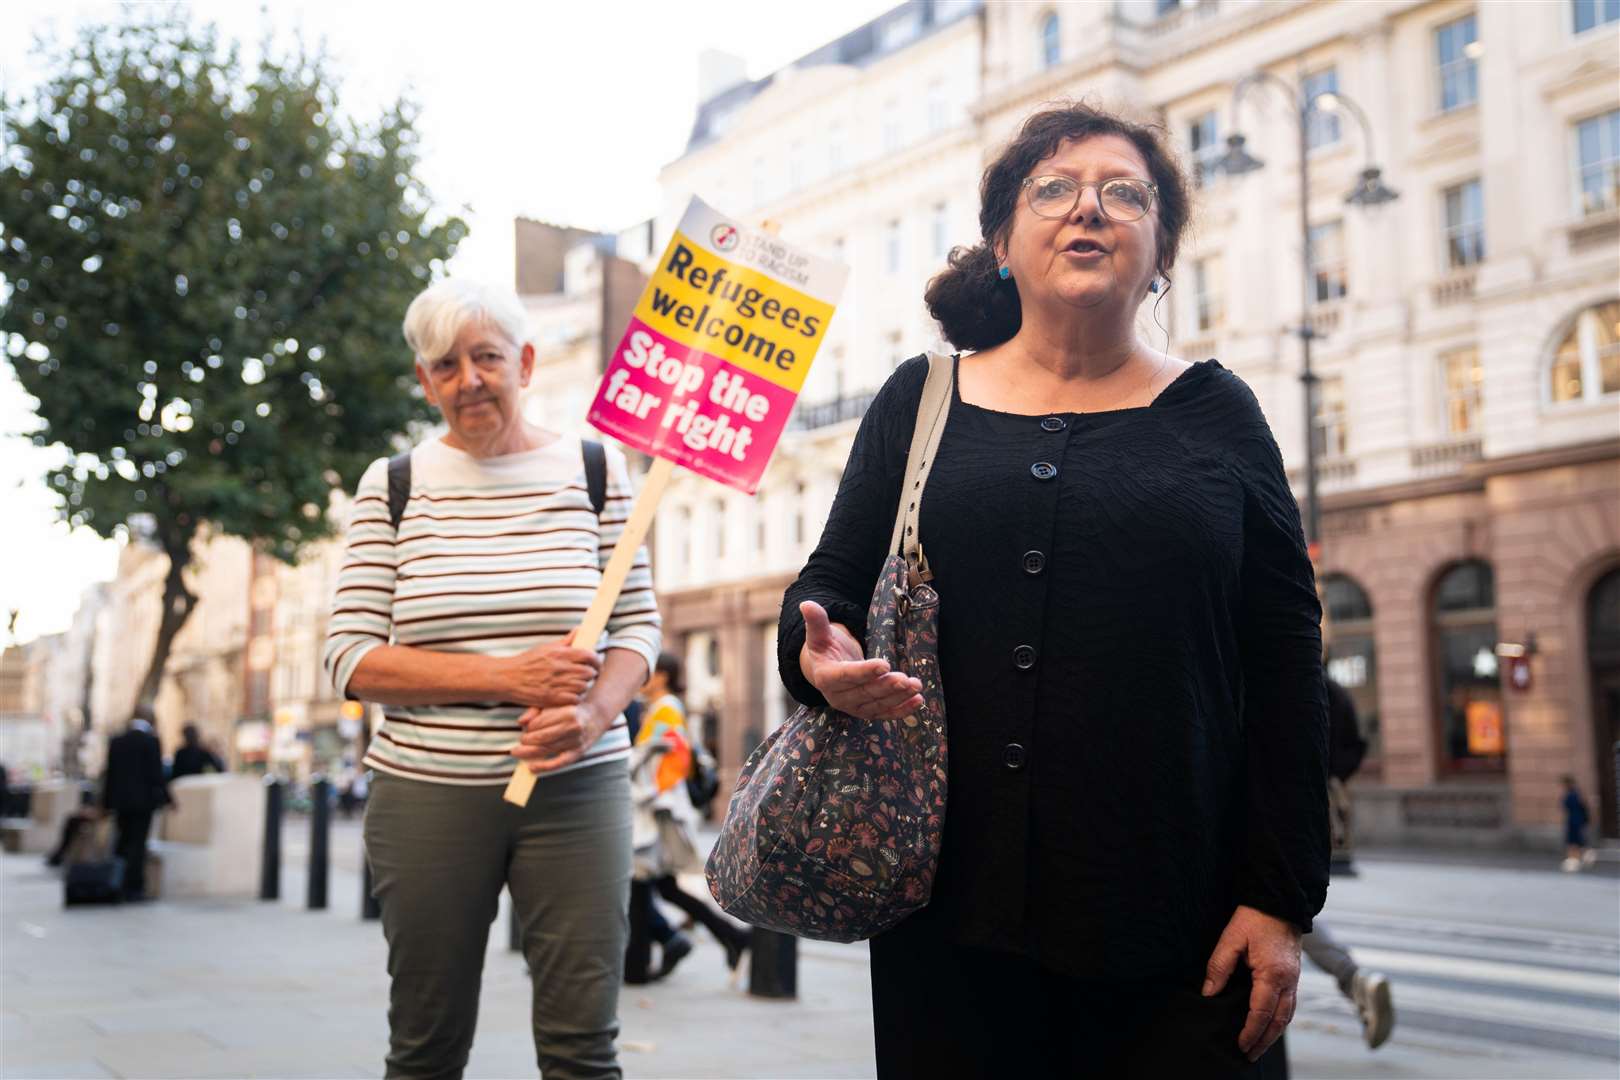 Local councillor Carralyn Parkes, who recently lost a High Court fight against Home Secretary Suella Braverman over the barge, also attended the protest (James Manning/PA)